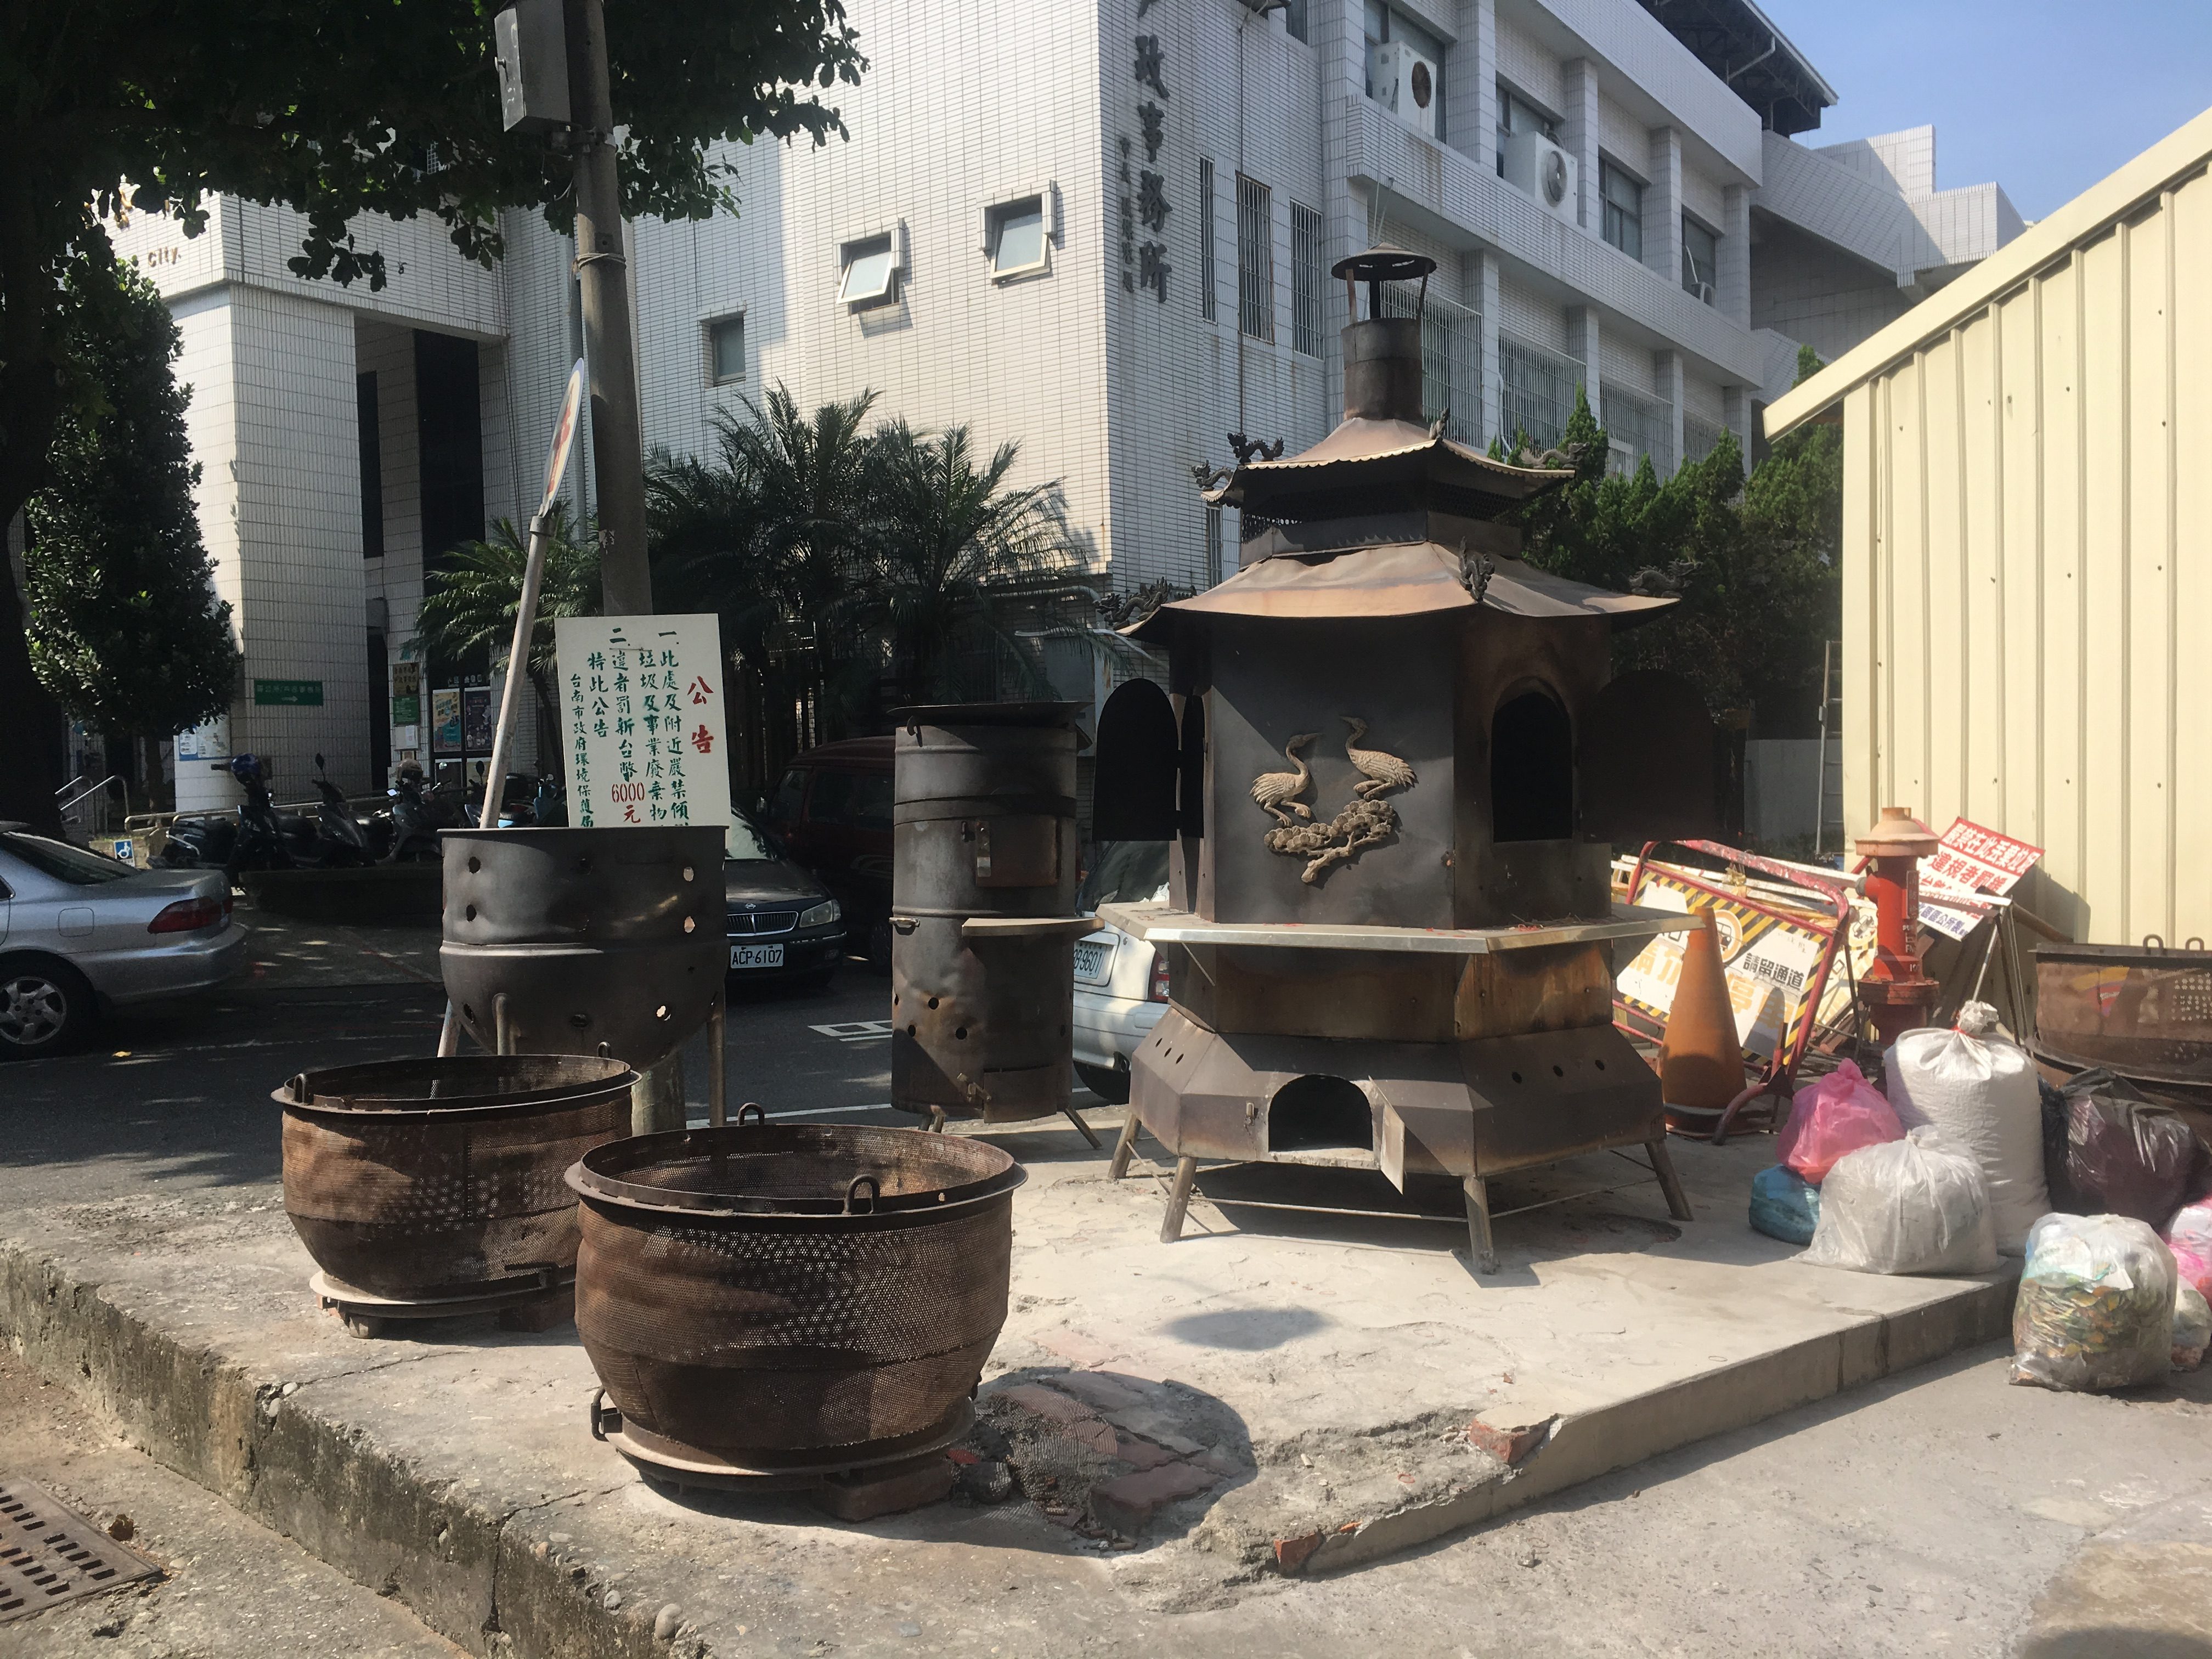 Tainan burners - outdoor heating in the tropics?